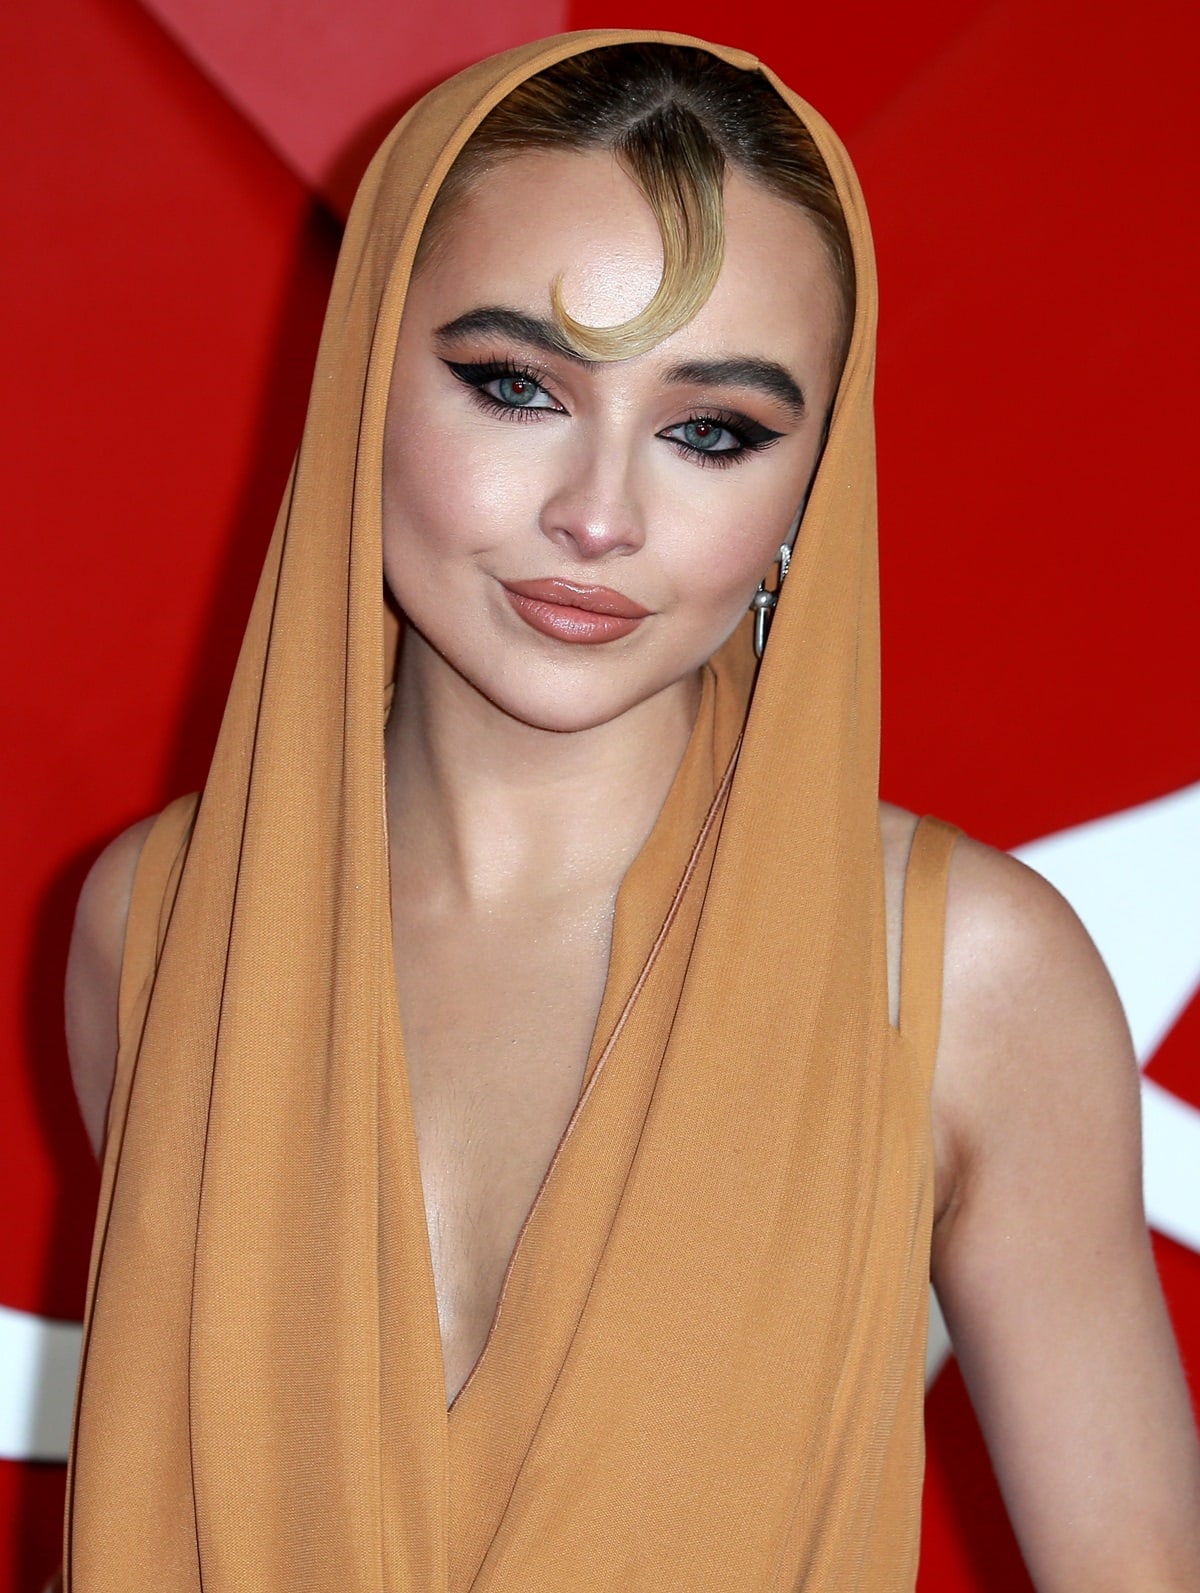 Sabrina Carpenter in a hooded beige jumpsuit with an edgy hairdo at The Fashion Awards 2022